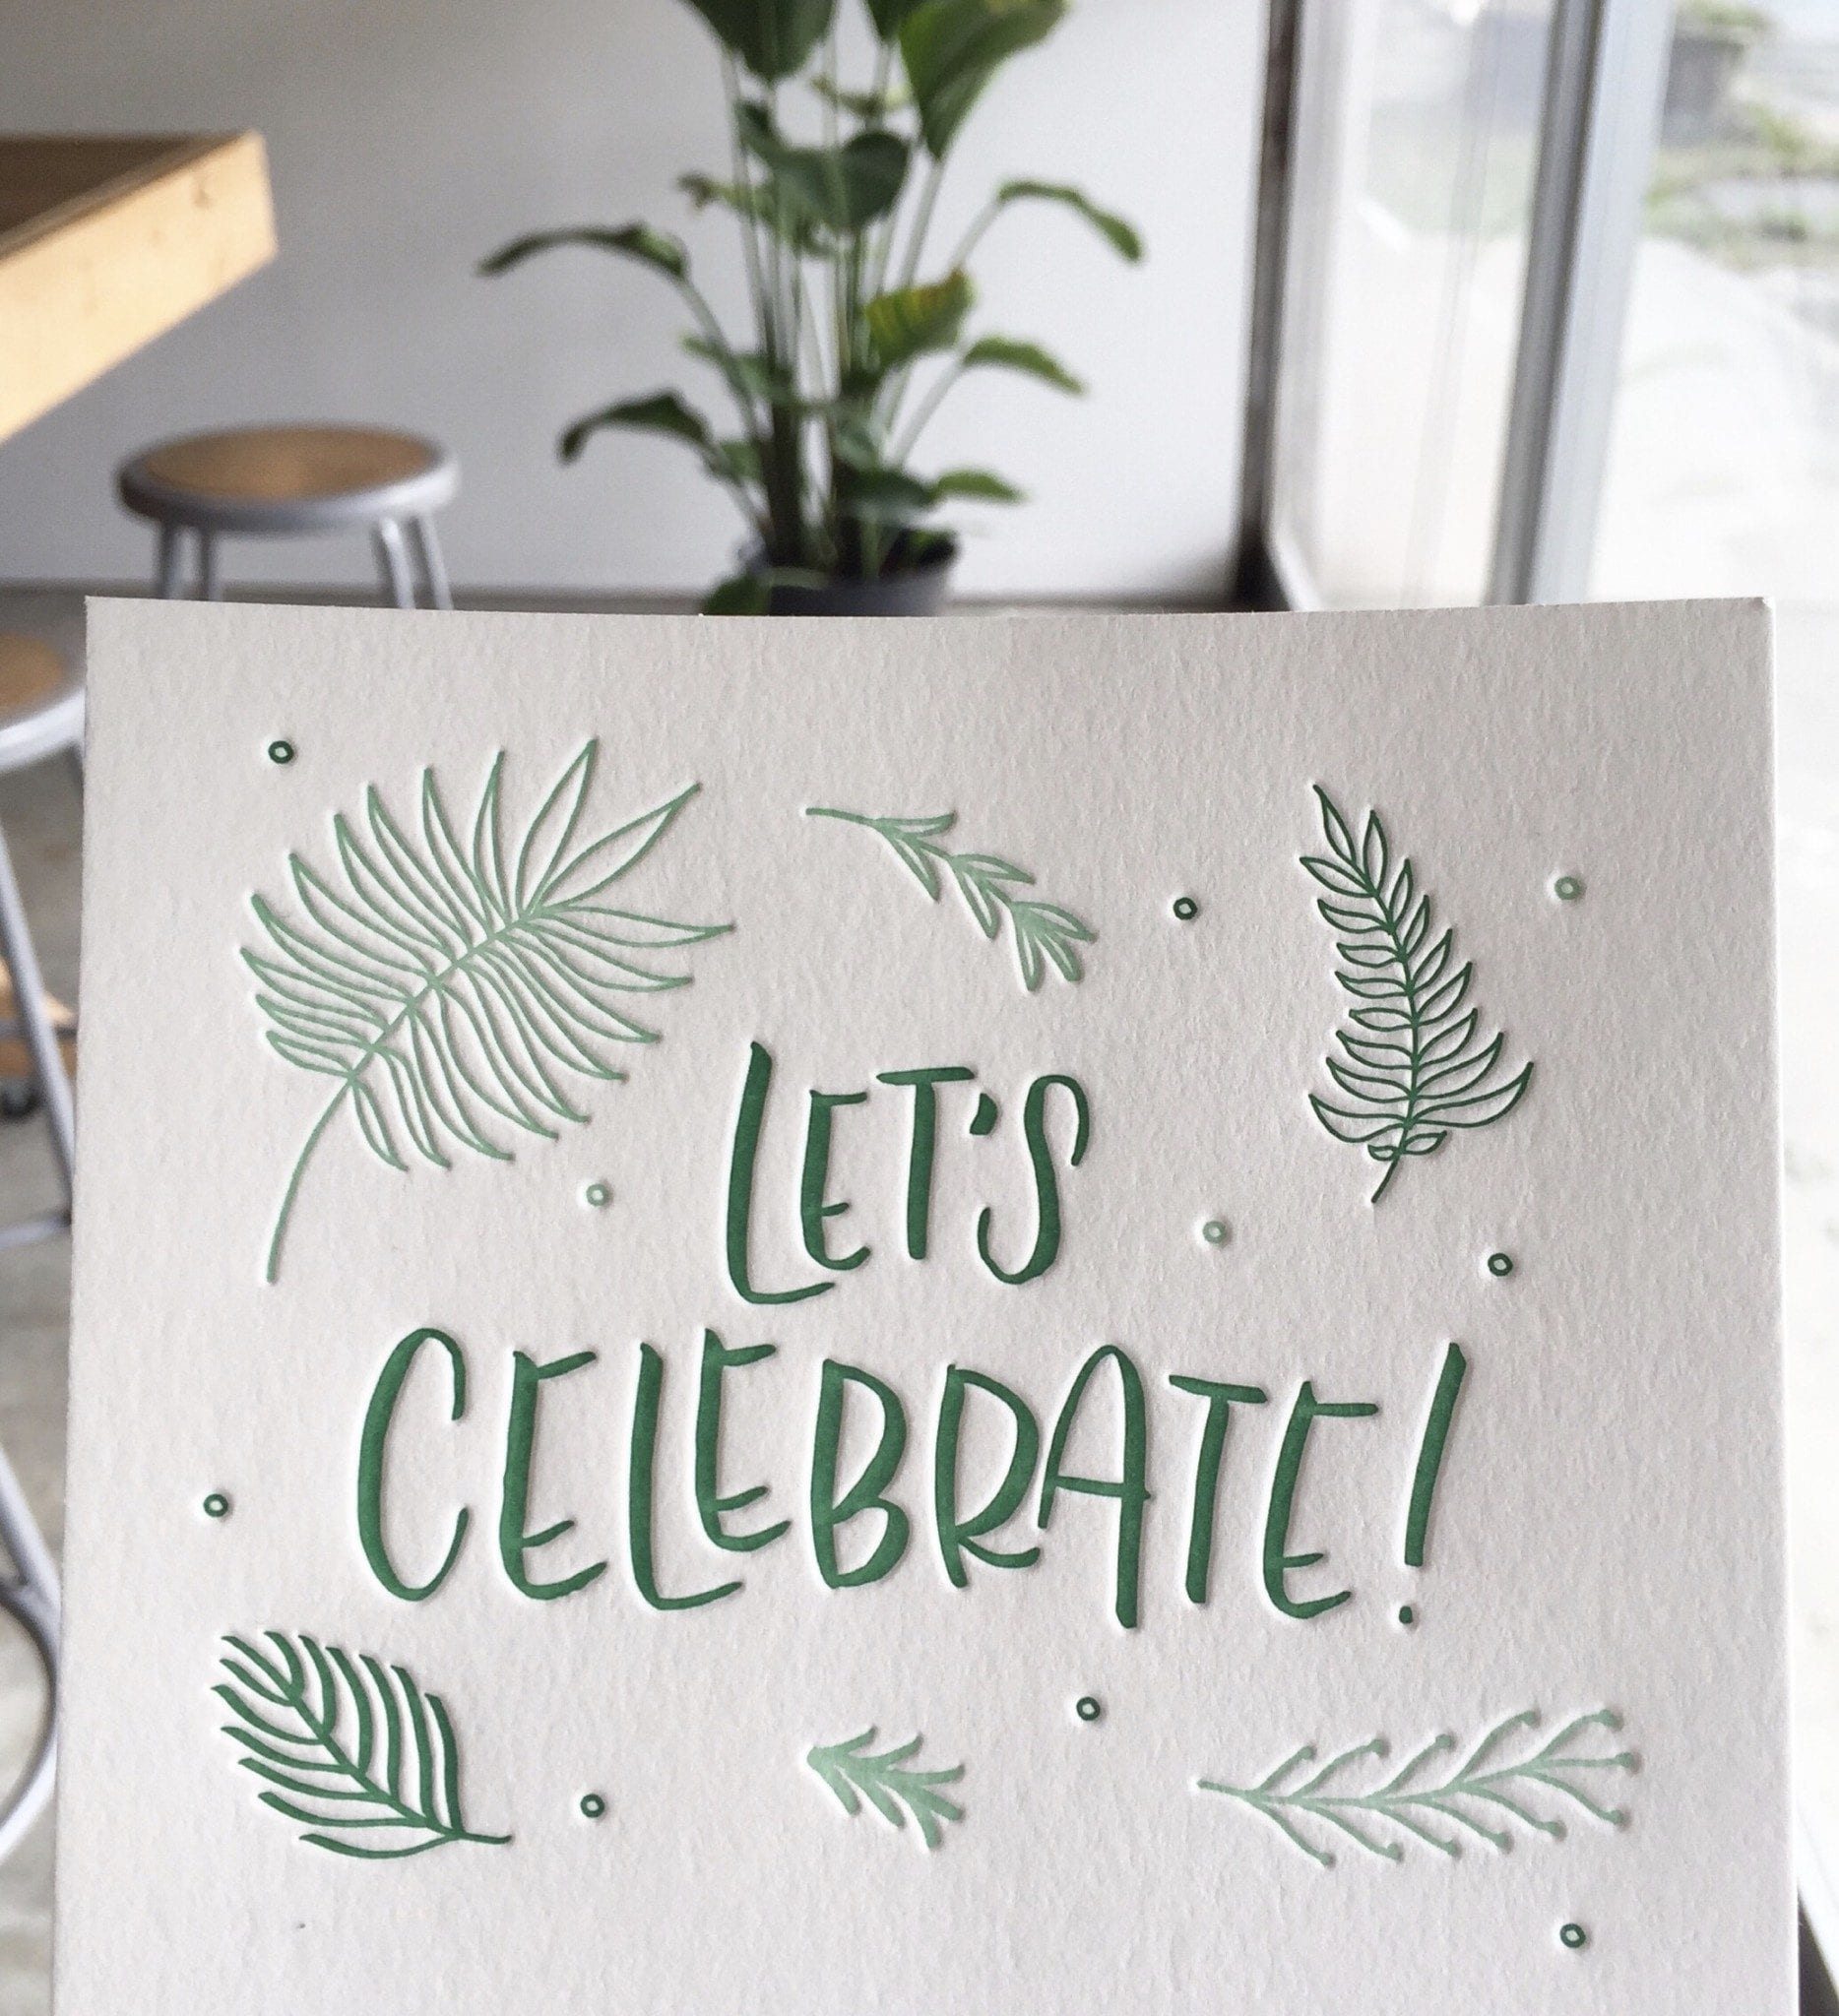 Let's Celebrate hand lettering with drawn fern elements